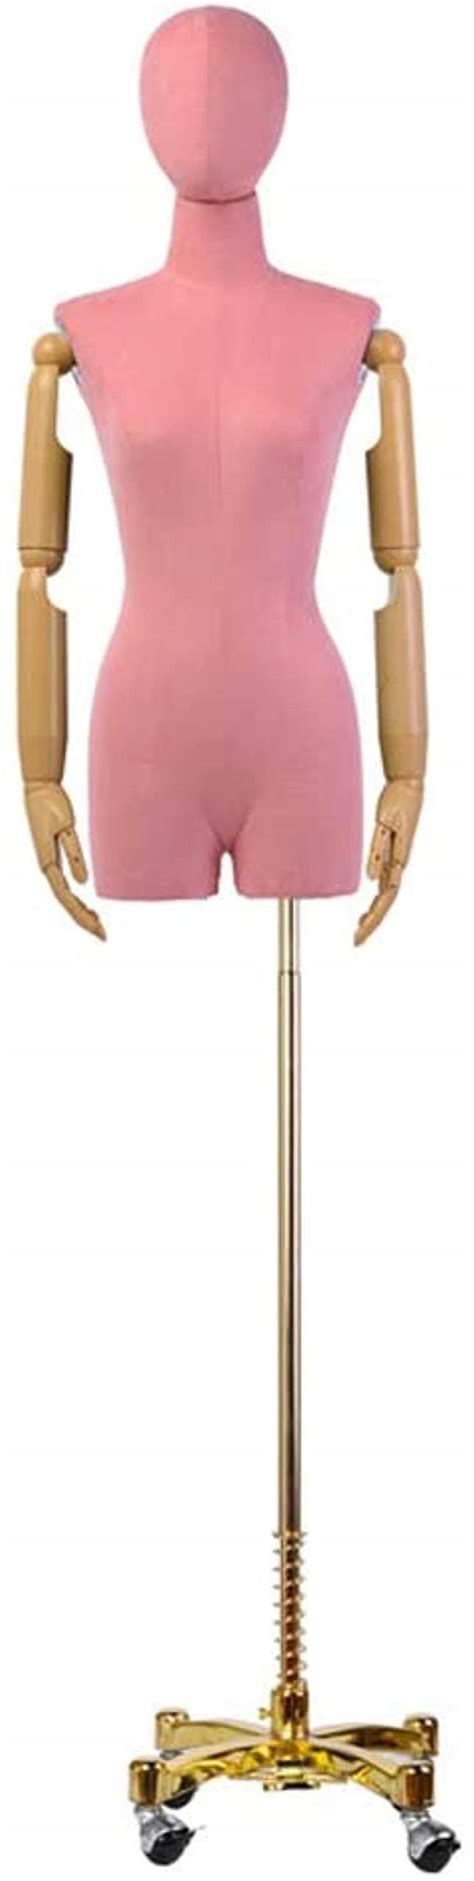 Buy Tailors Dummy Dress Forms With Arms Female Mannequin Full Body